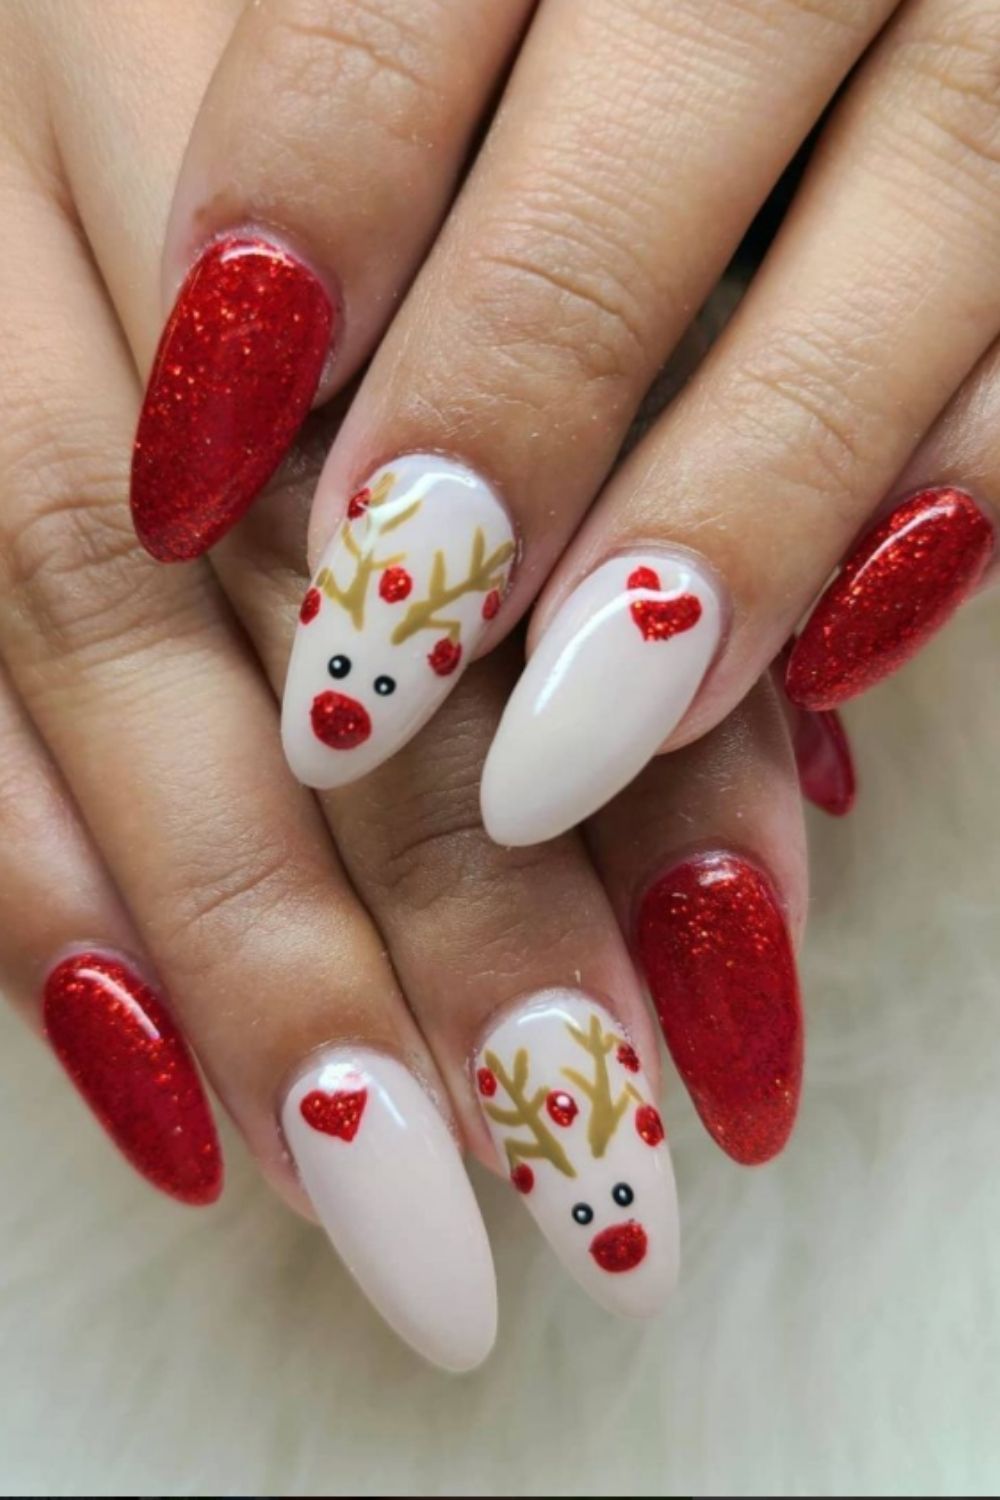 Red and white glitter nails